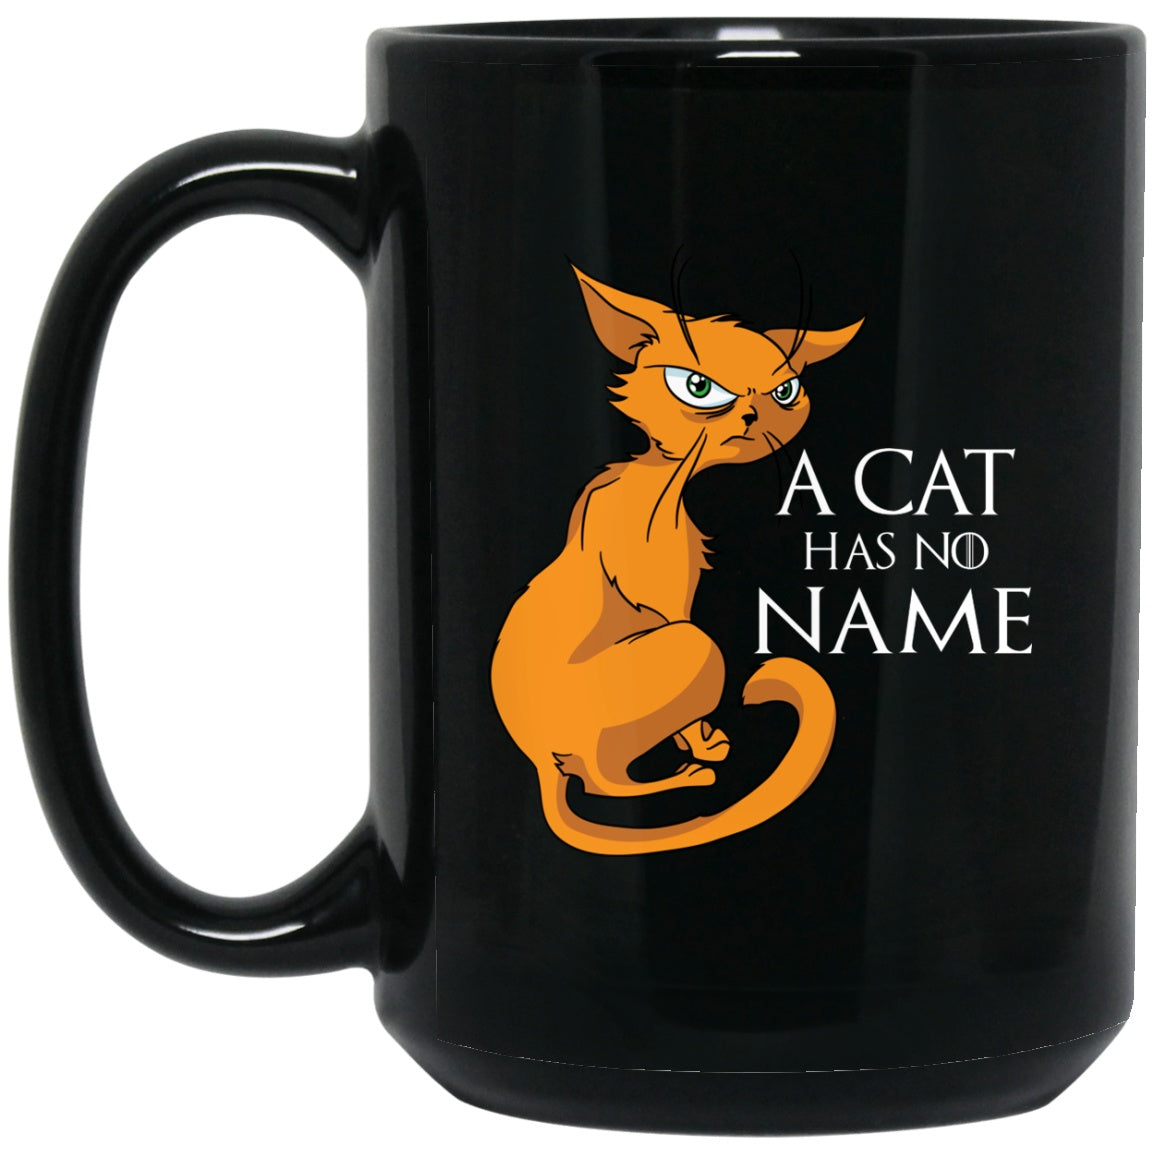 A Cat Has No Name Funny Black Coffee Mugs - GoneBold.gift